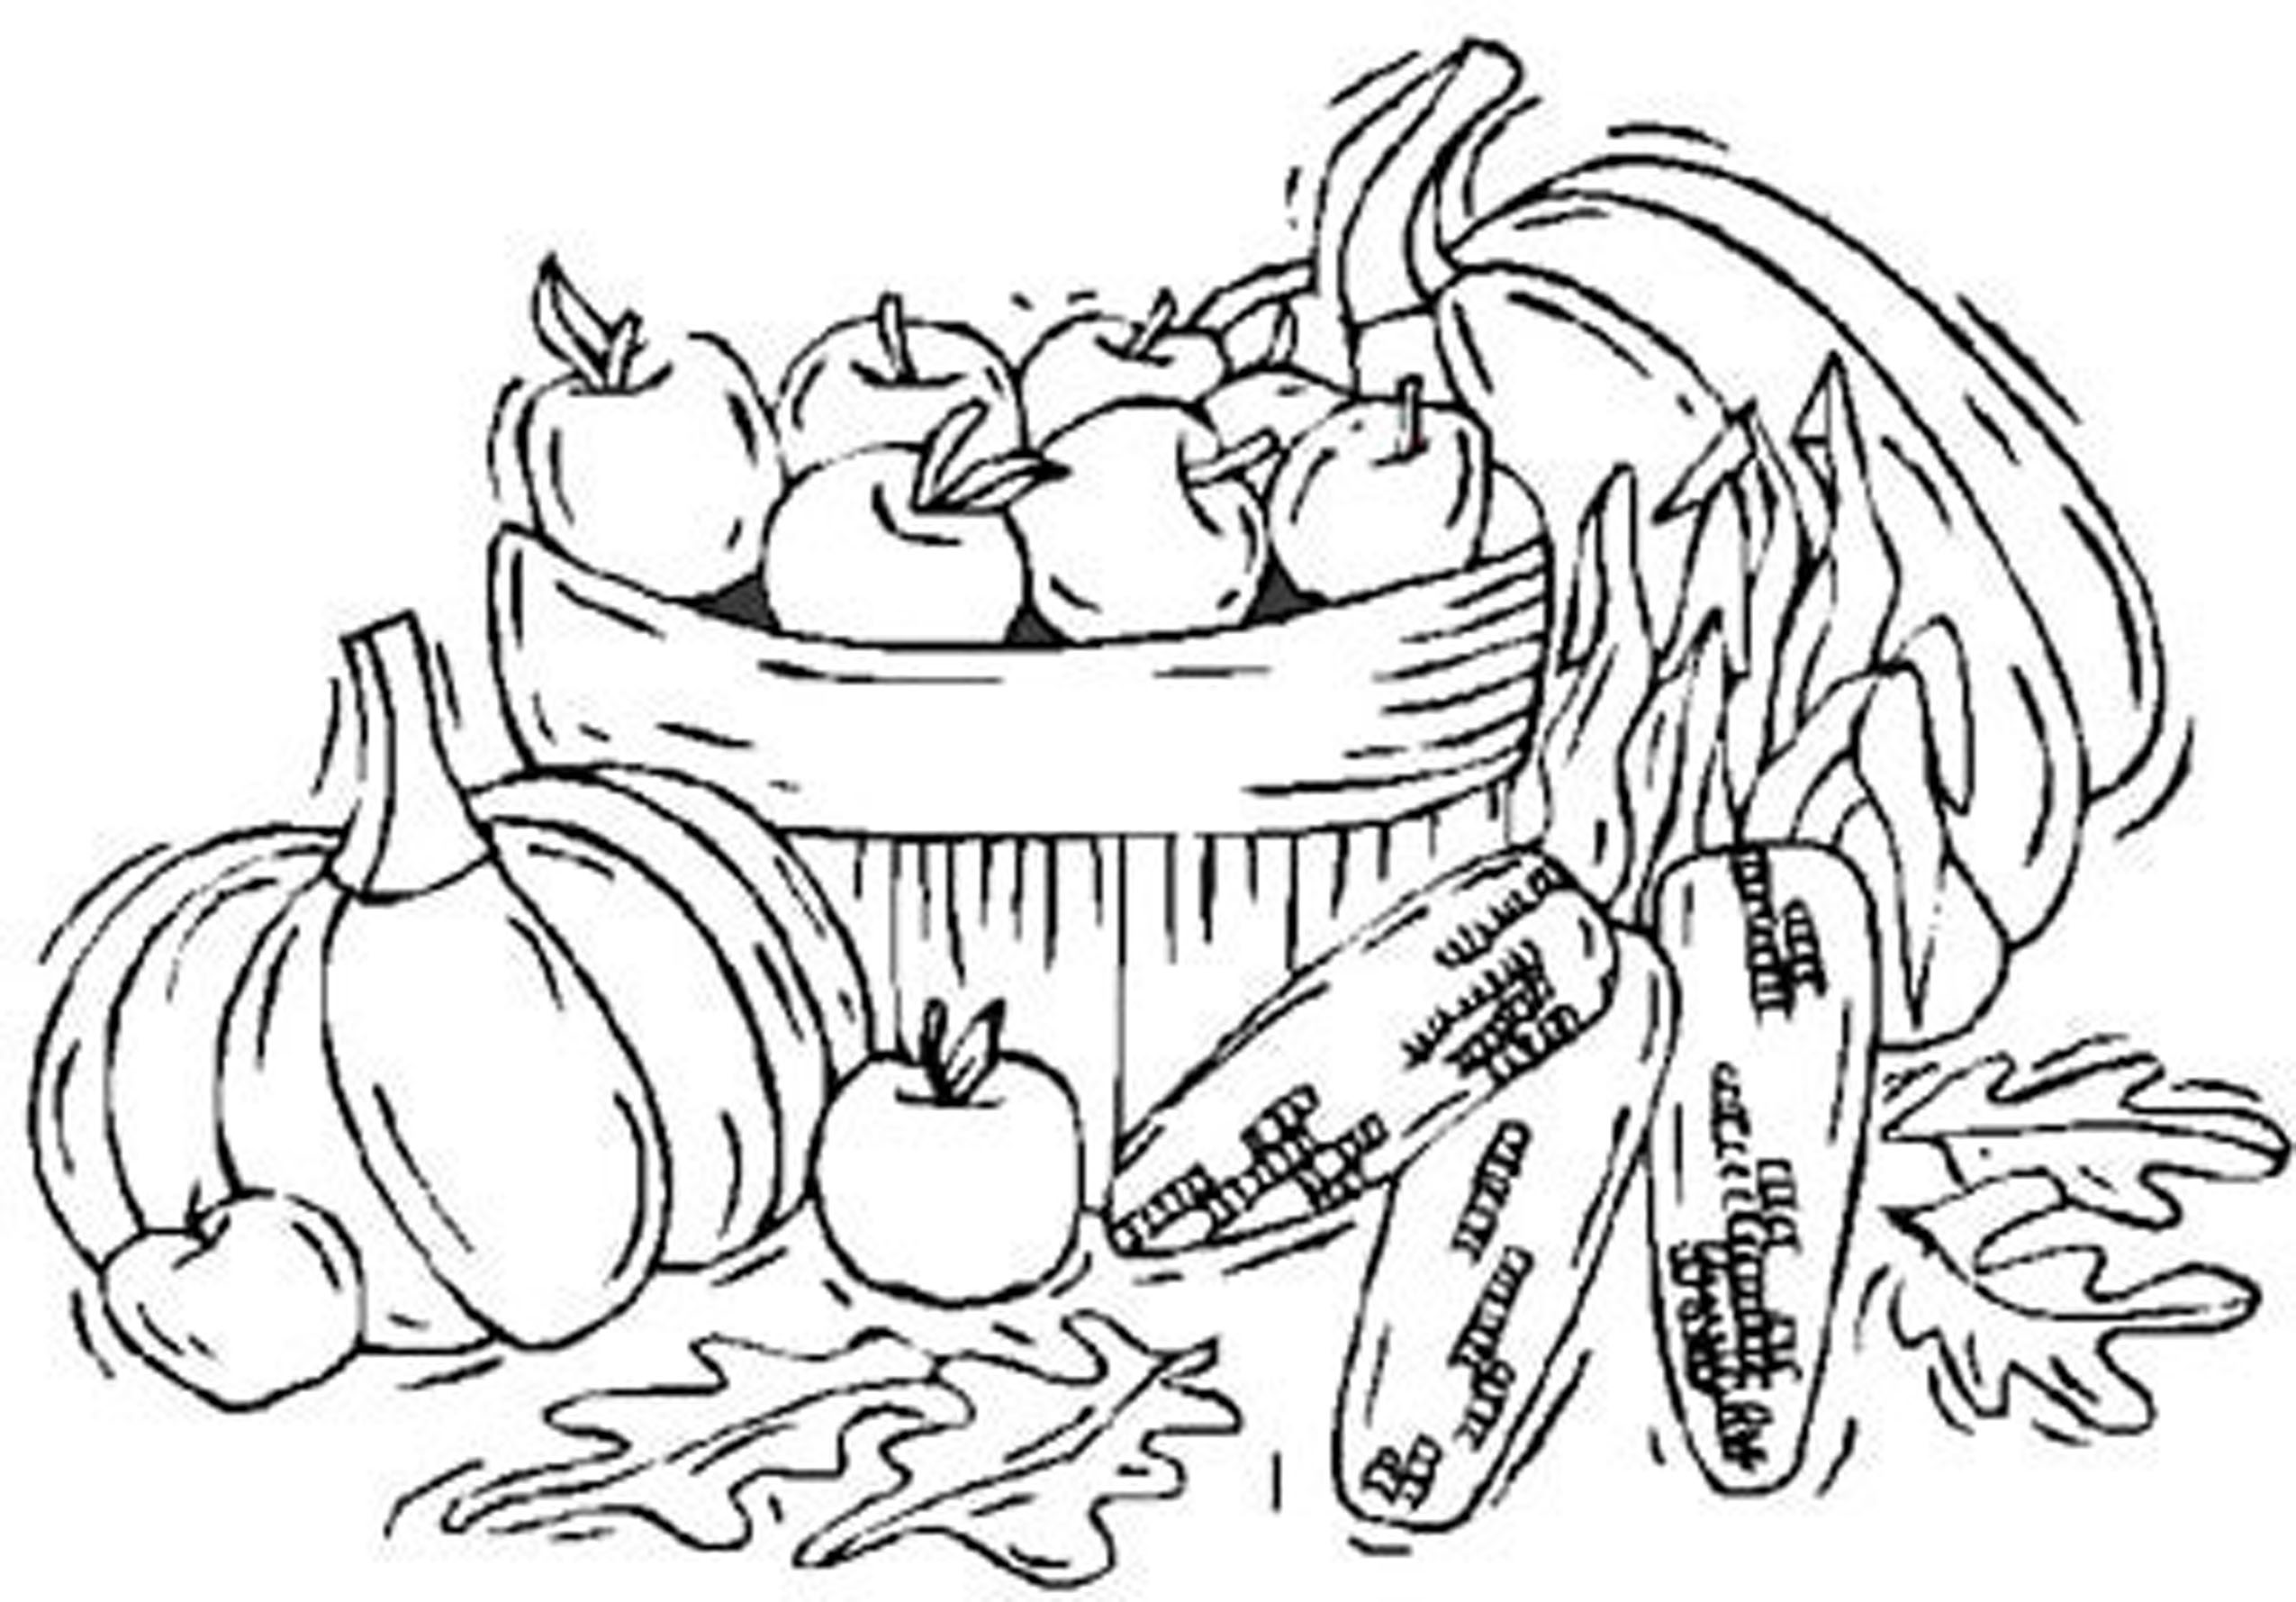 autumn-coloring-pages-images